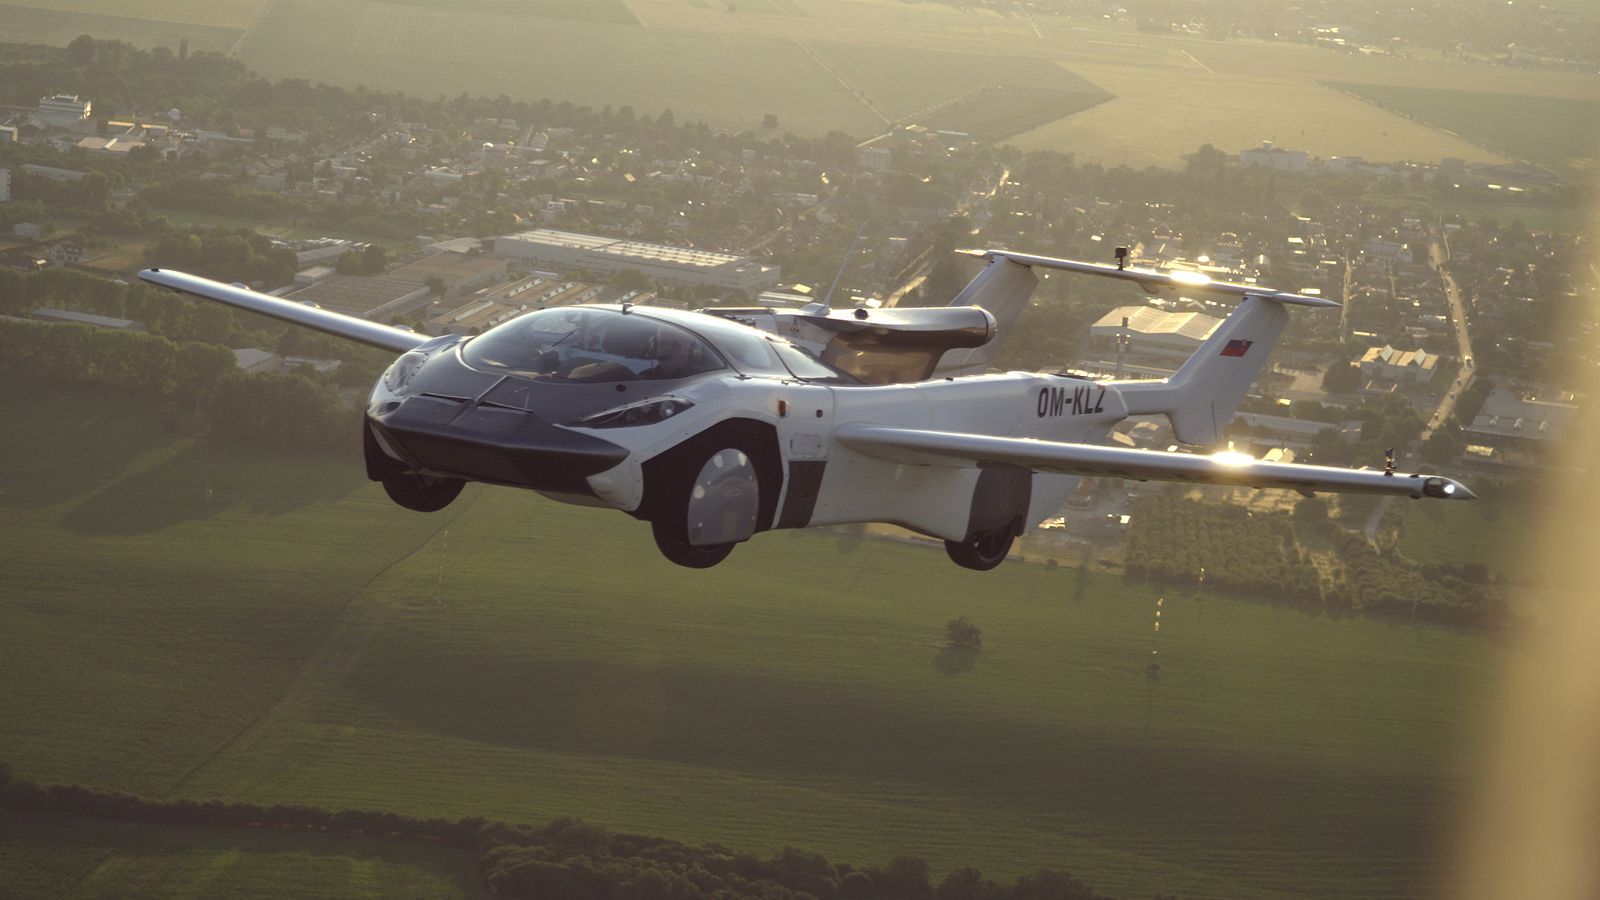 AirCar's co-founder says his company is 